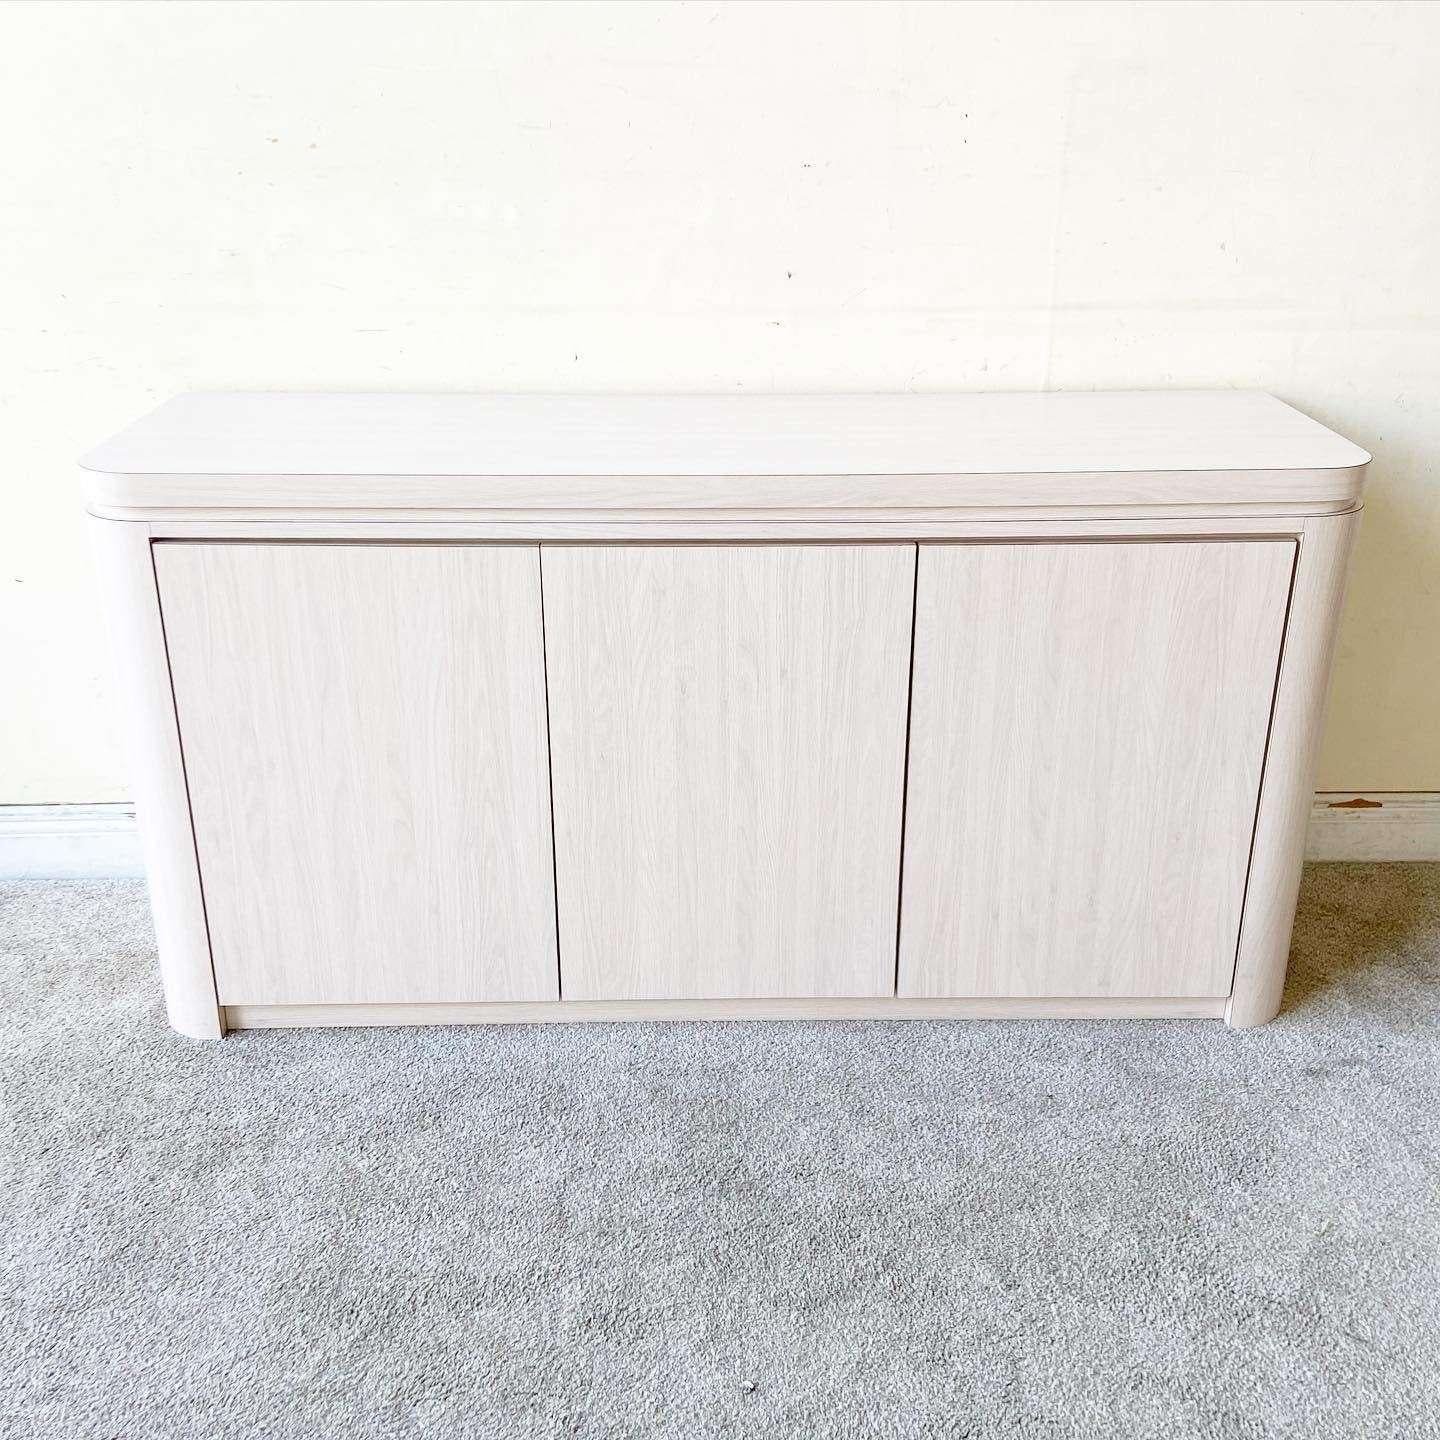 Wonderful vintage postmodern Woodgrain laminate credenza. Features three cabinet doors which click open to reveal ample storage.